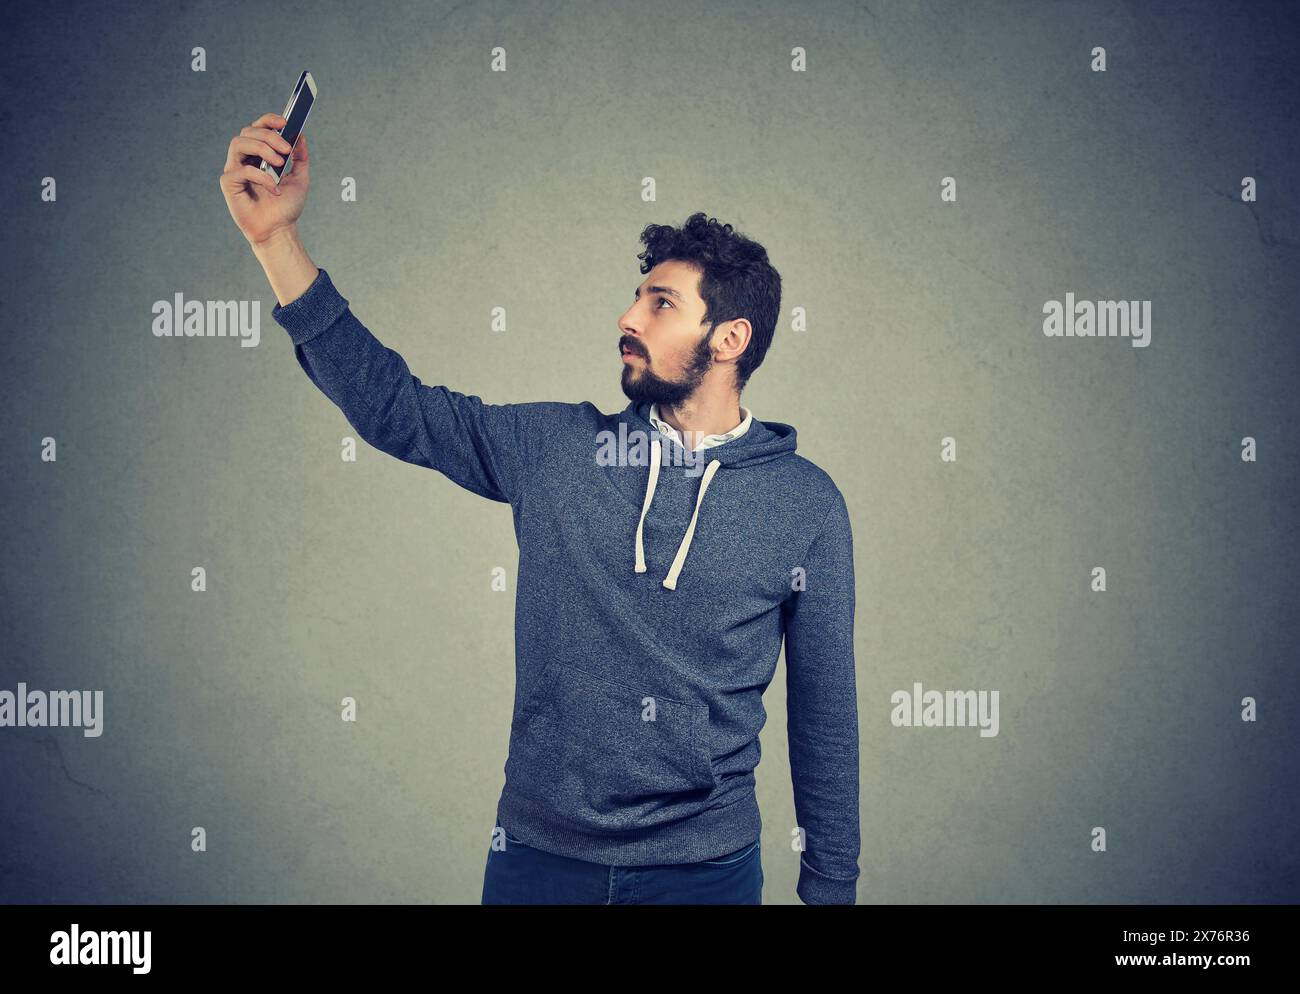 Bad wifi connection, man lifts mobile phone up and wants to connect to internet. Stock Photo